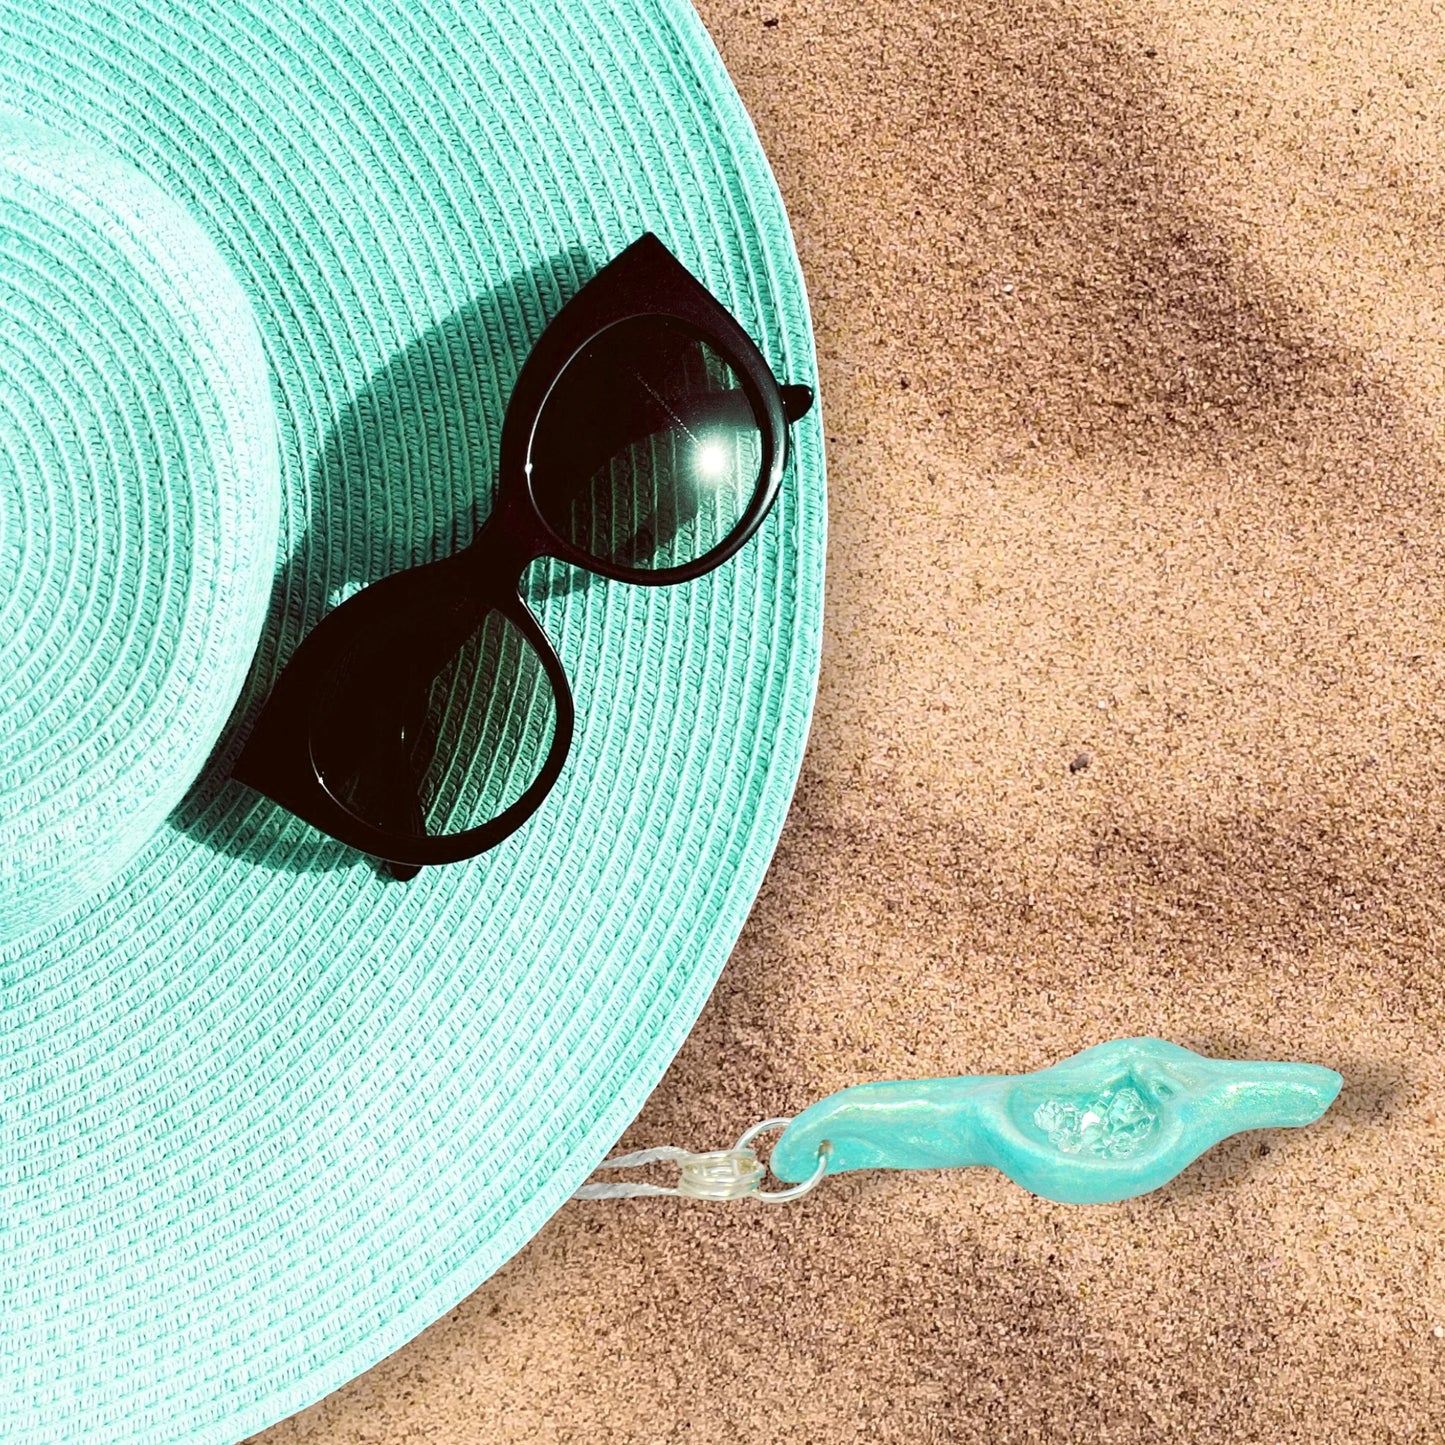 Diamond Mine Pendant is named for the eight herkimer diamonds that enhance the beauty of this gorgeous pendant! The pendant is shown laying on the sandy beach with a turquoise beach hat and black sunglasses.